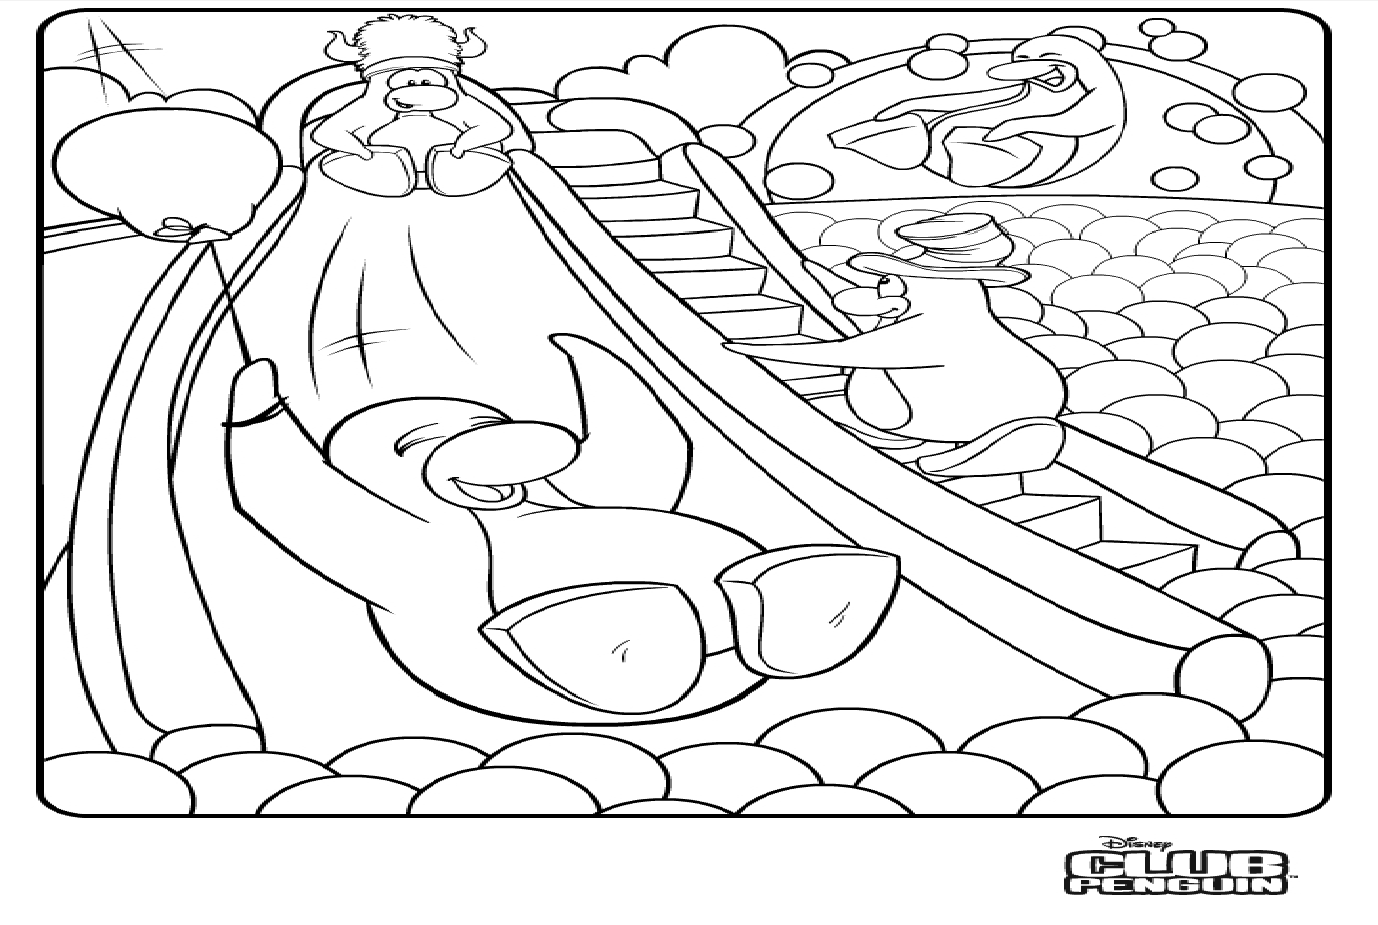 New Coloring Page: Fall Fair Iceburg | CP Cheats of the States